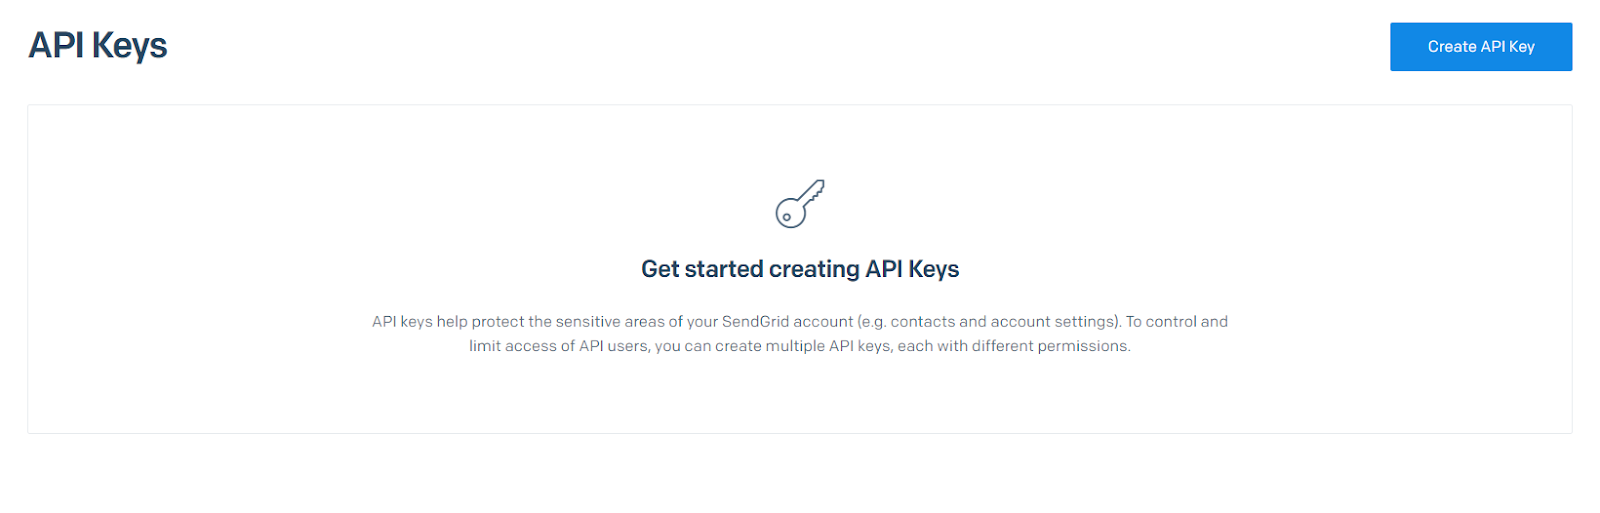 Screen for API Keys option in Settings, with the button "Create API Key" to create a new key for using in your project.